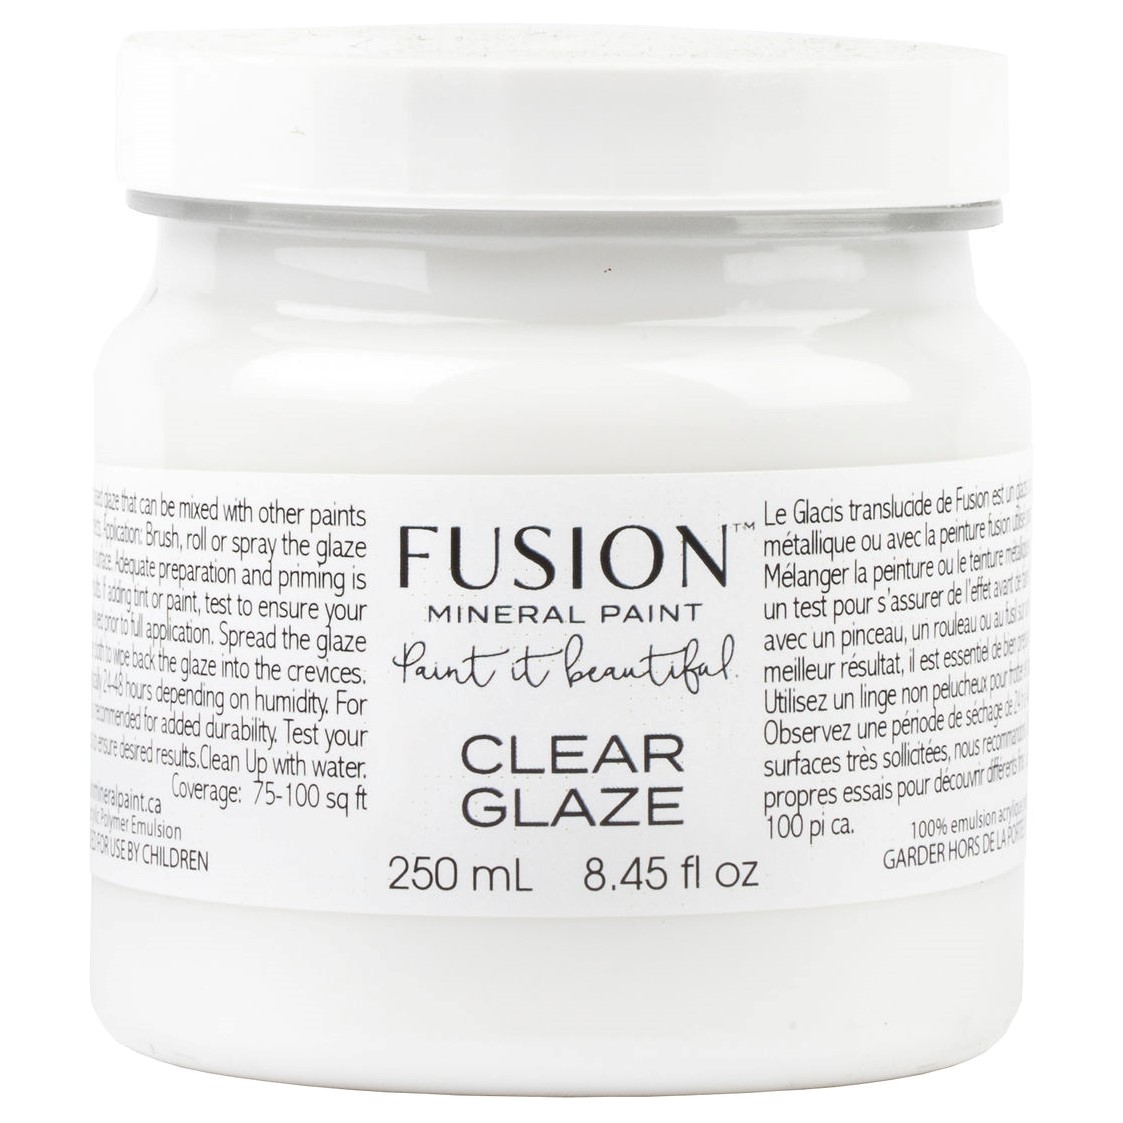 Clear glaze fusion mineral paint Goed Gestyled Brielle